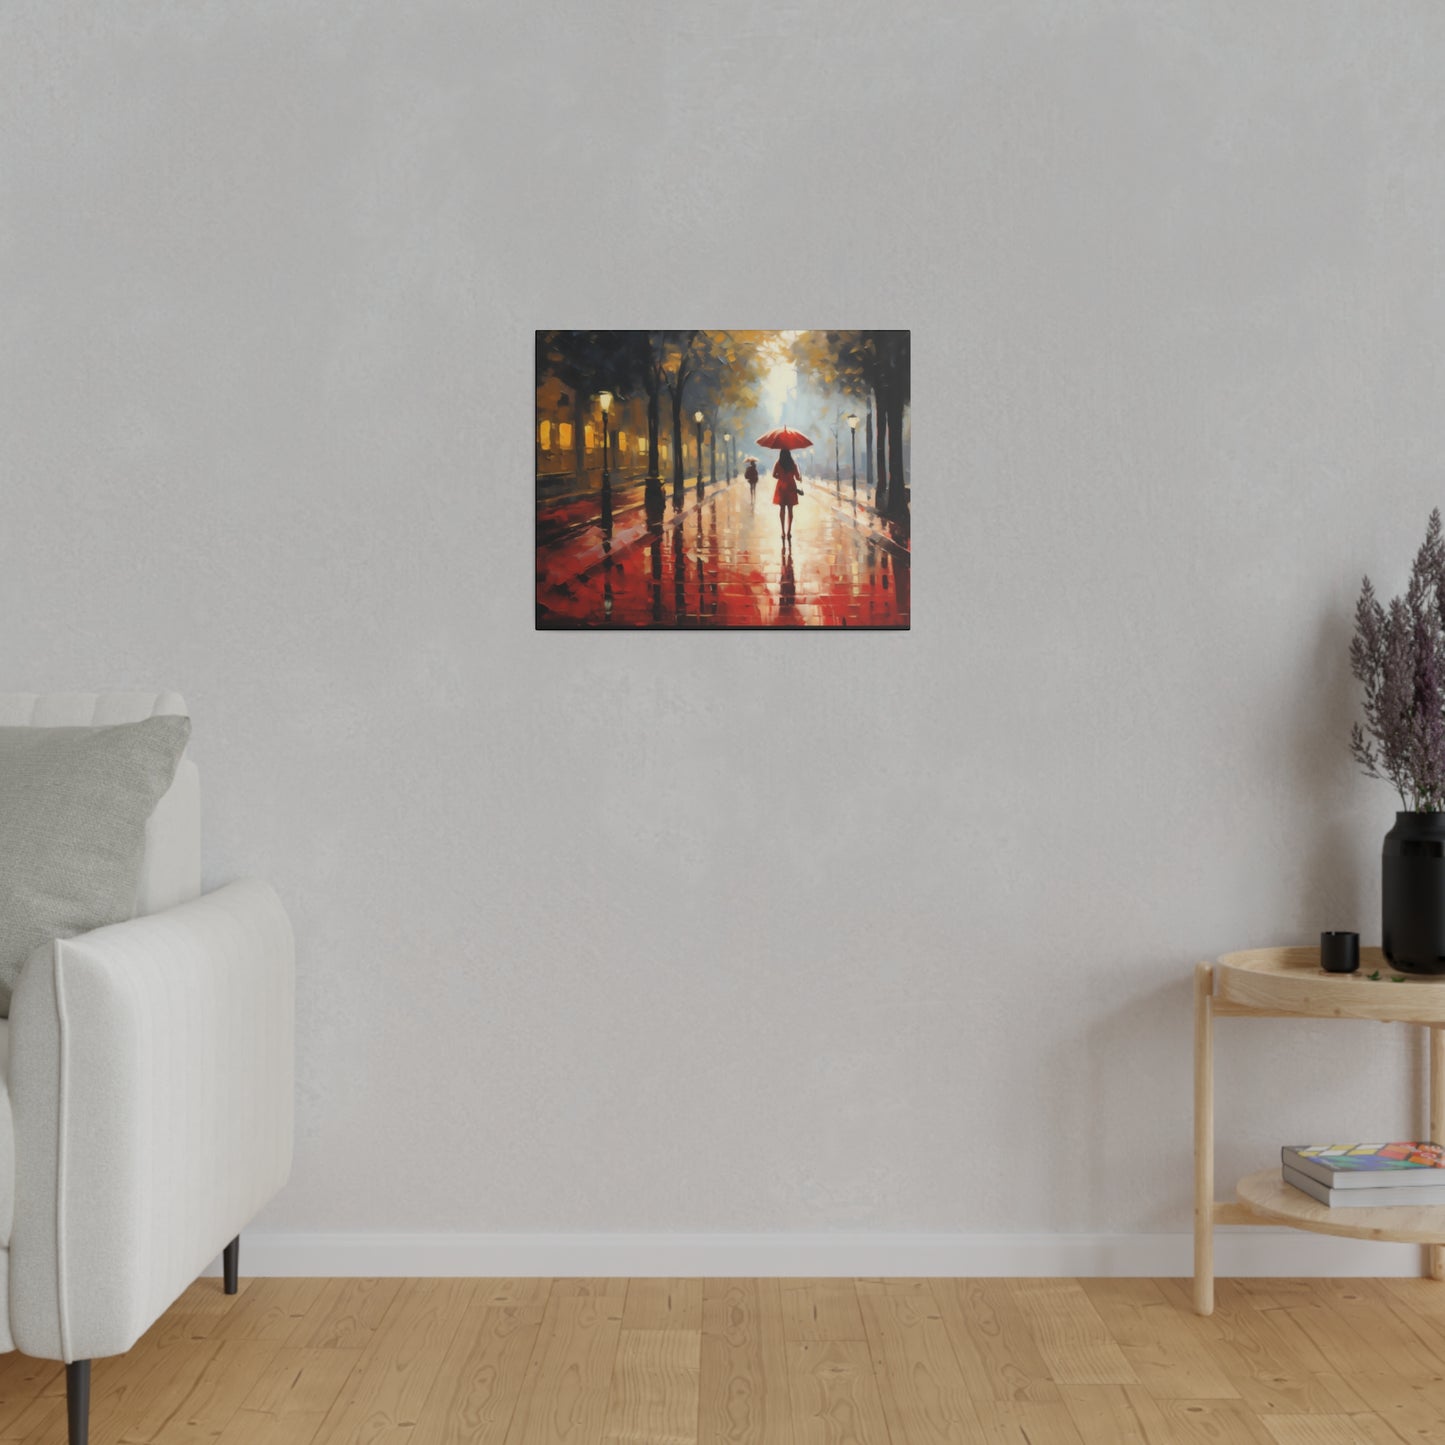 London at night in the rain with a Red Umbrella | Stretched Canvas Print